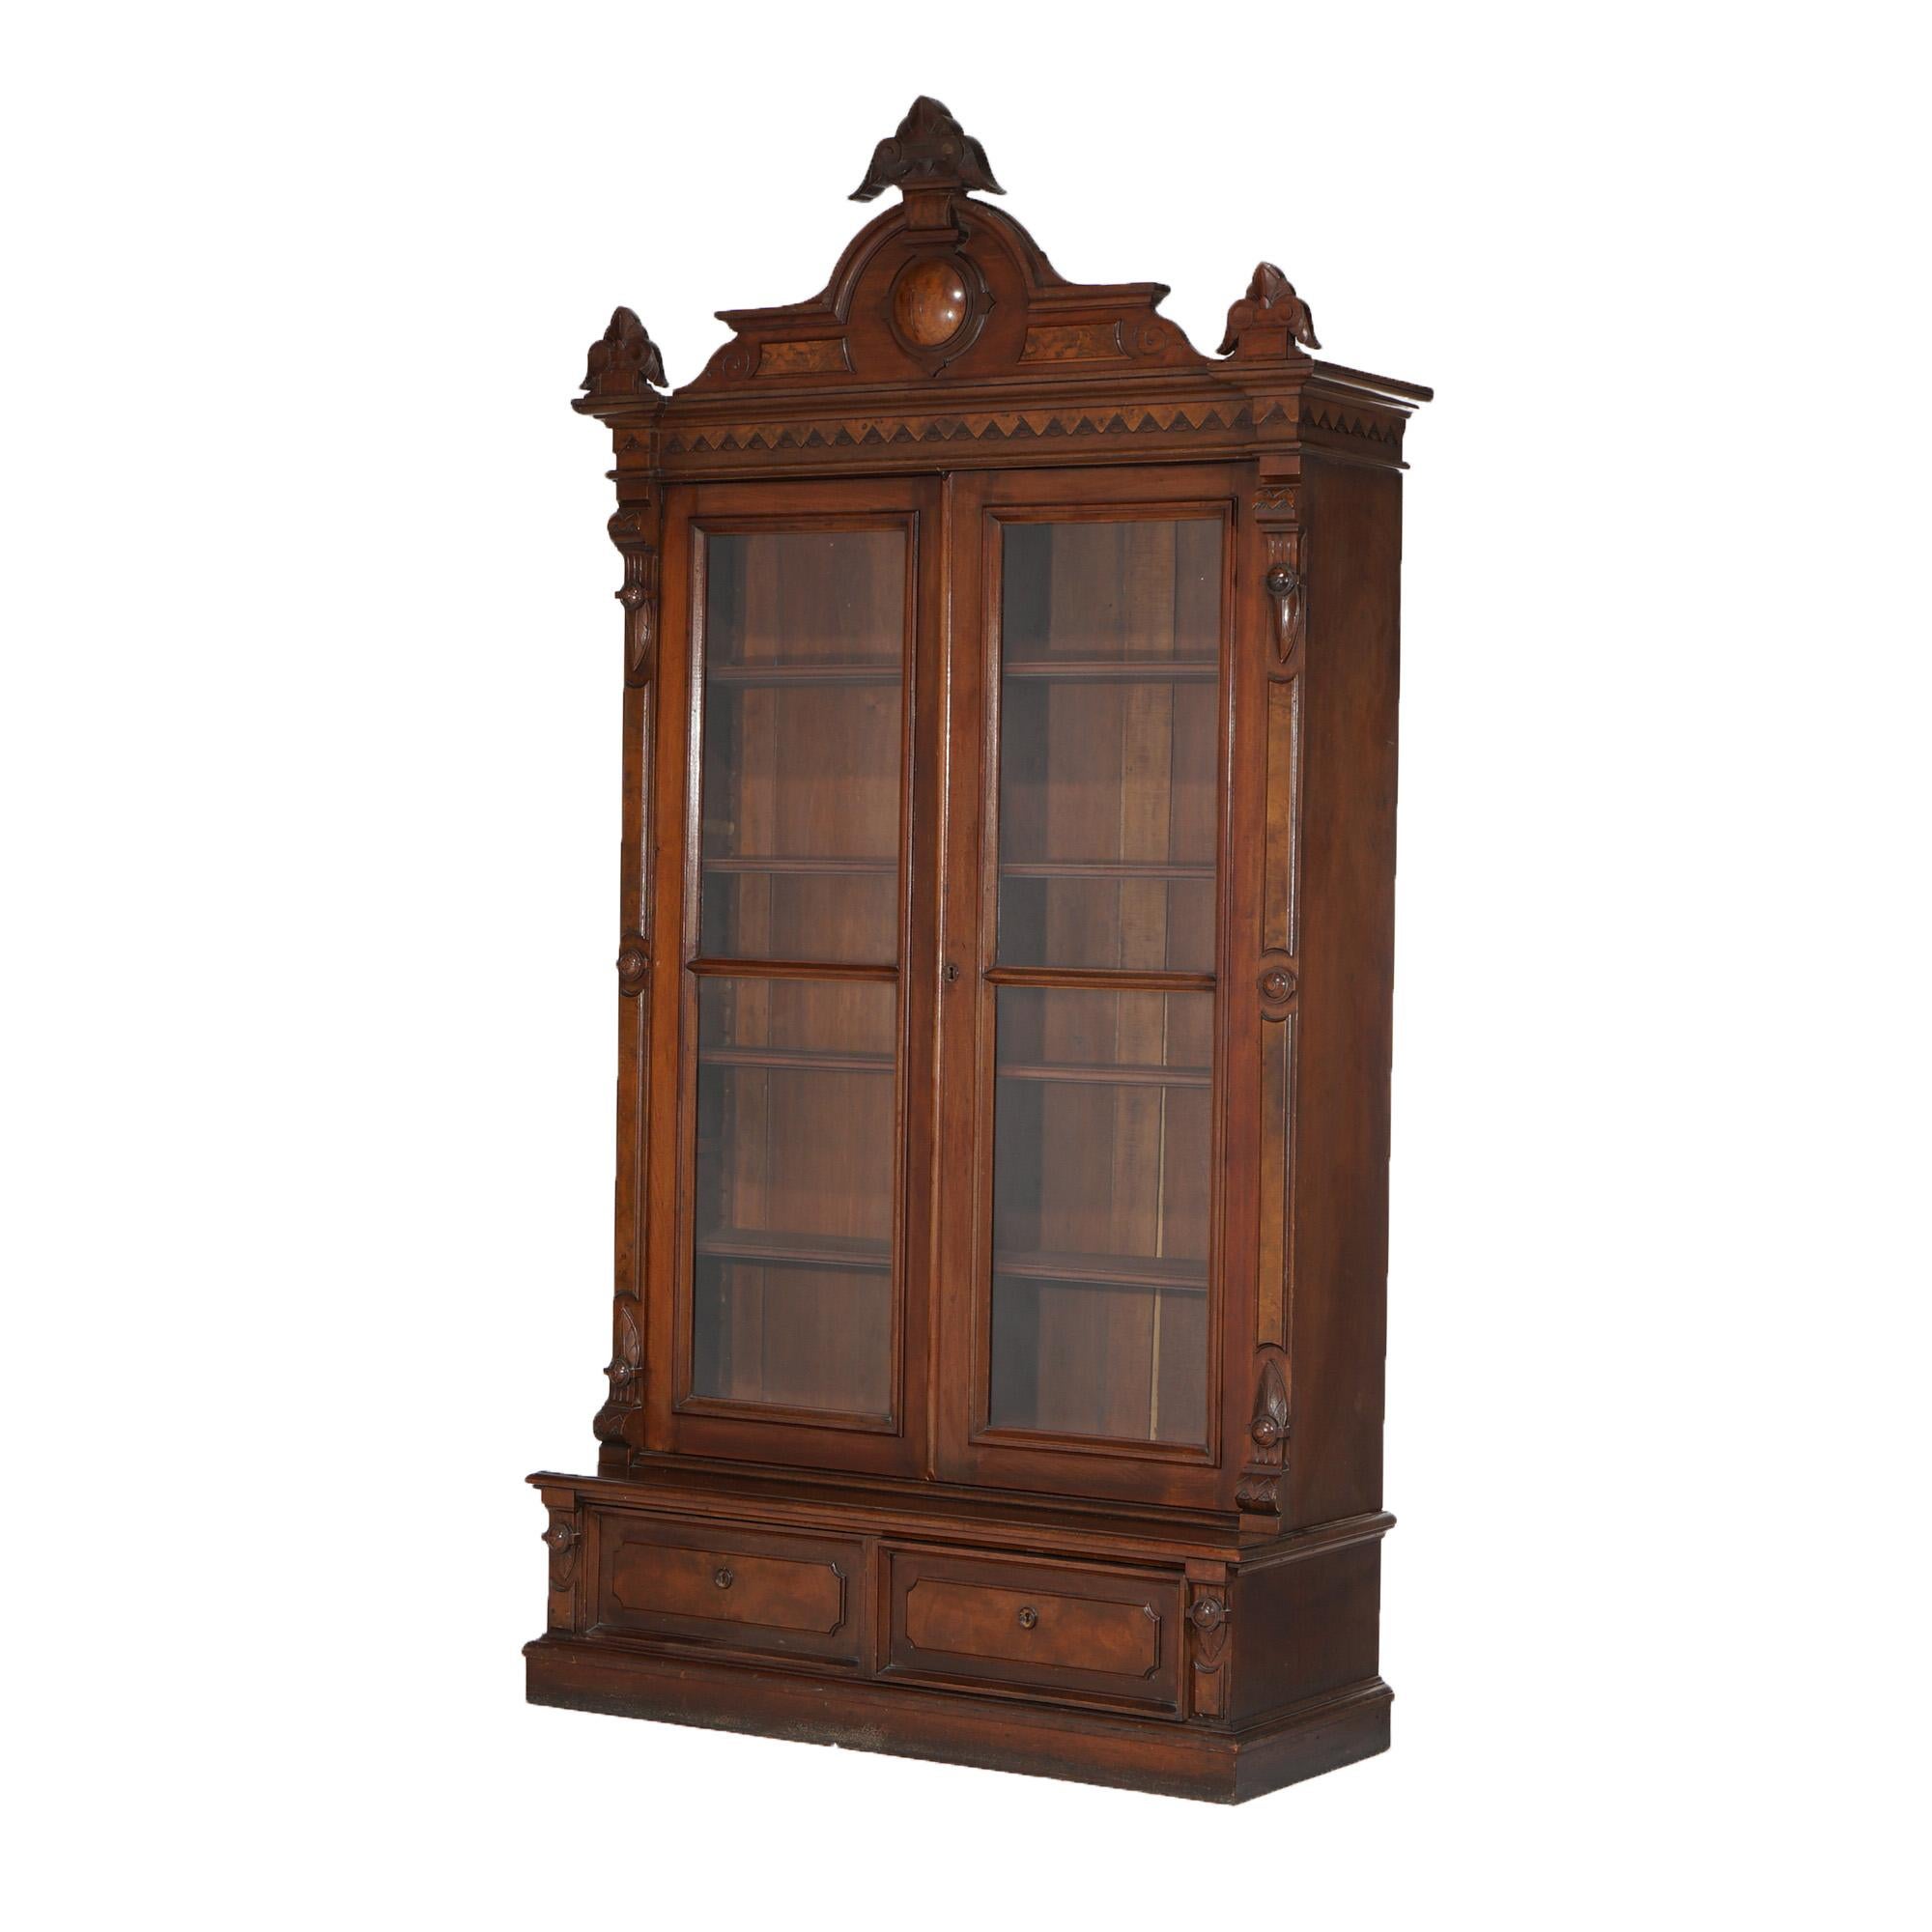 ***Ask About Reduced In-House Shipping Rates - Reliable Service & Fully Insured***
An antique Renaissance Revival enclosed bookcase offers walnut and burl construction with carved foliate crest over case with double glass doors opening to shelved